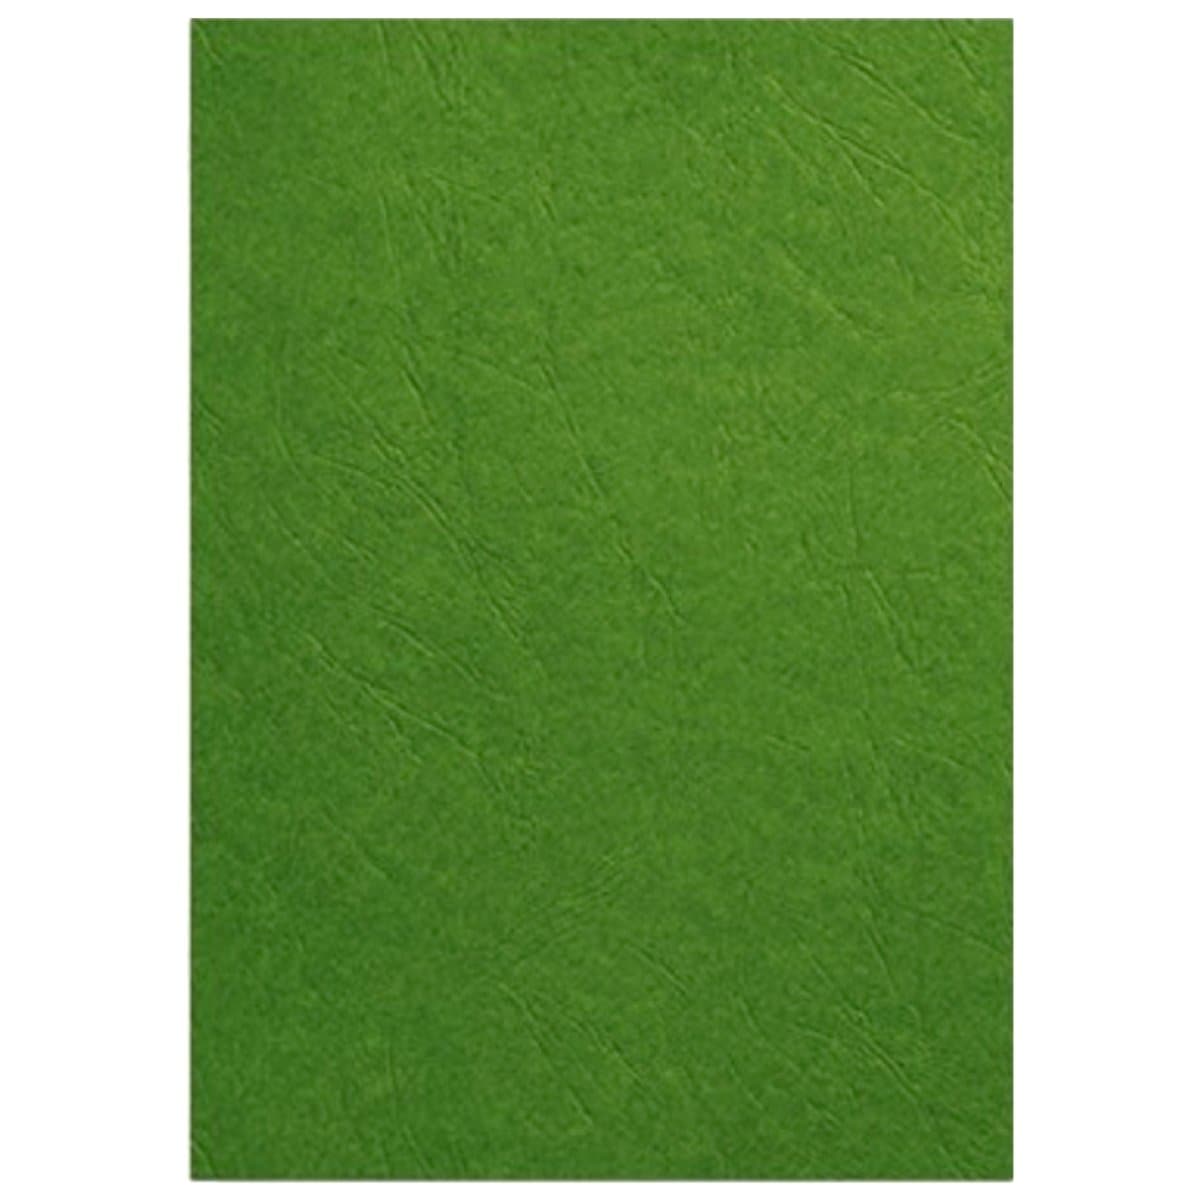 Deluxe A3 Embossed Leather Board Binding Cover, 100/pack, Green